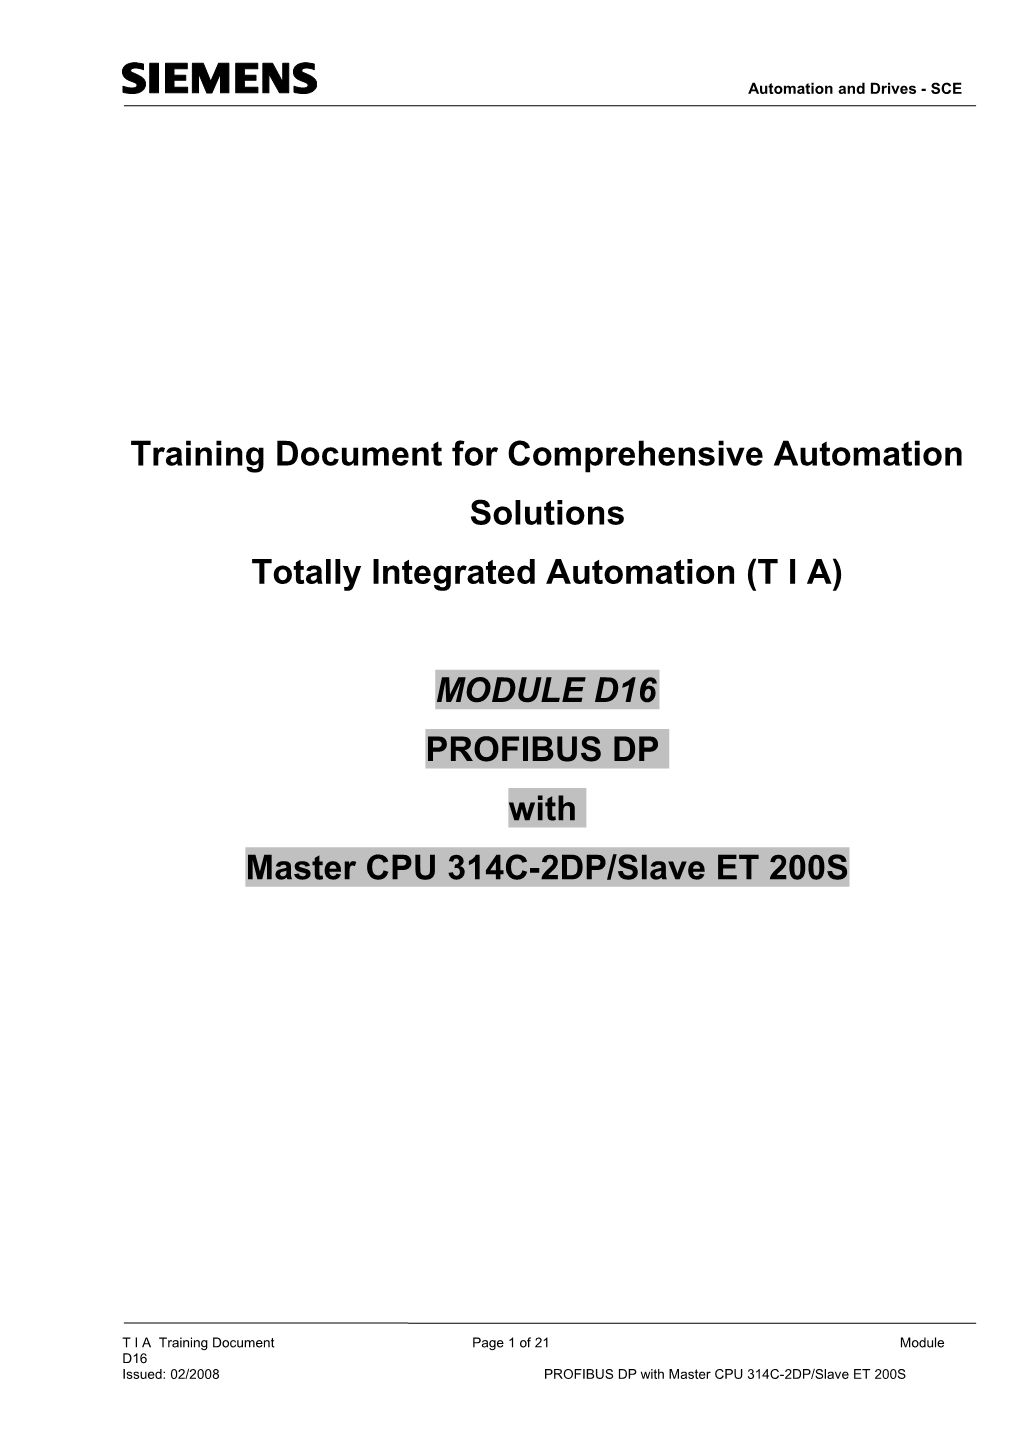 Training Document for Comprehensive Automation Solutions